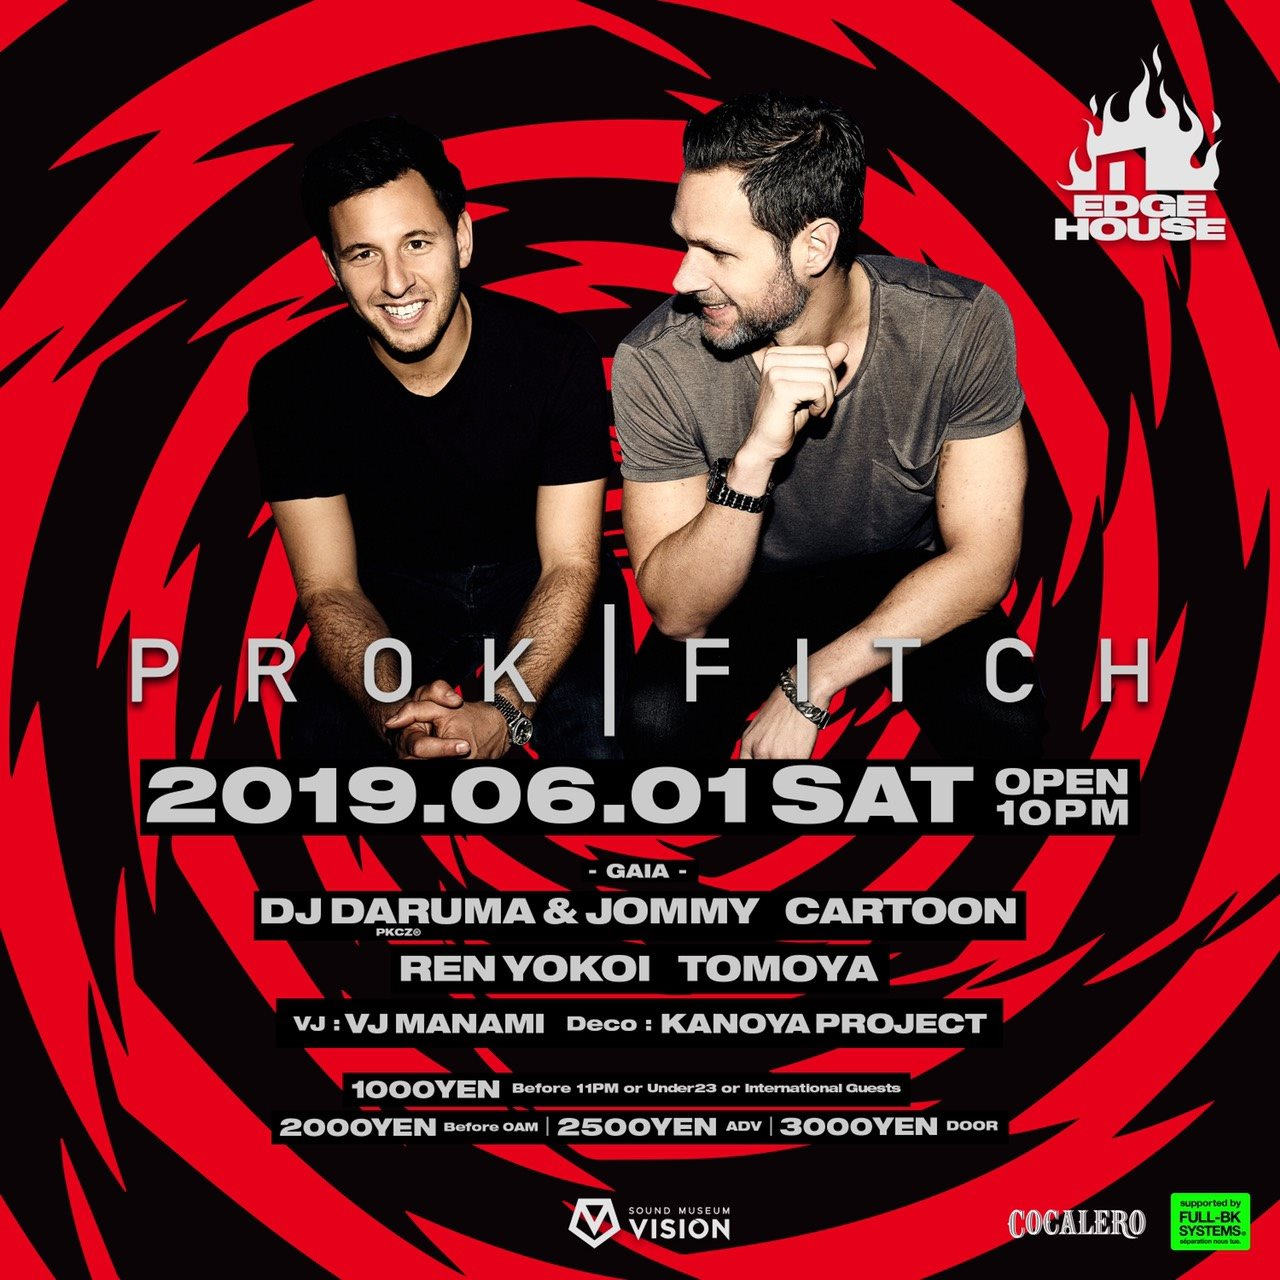 Edge House Feat. Prok & Fitch - Flyer front